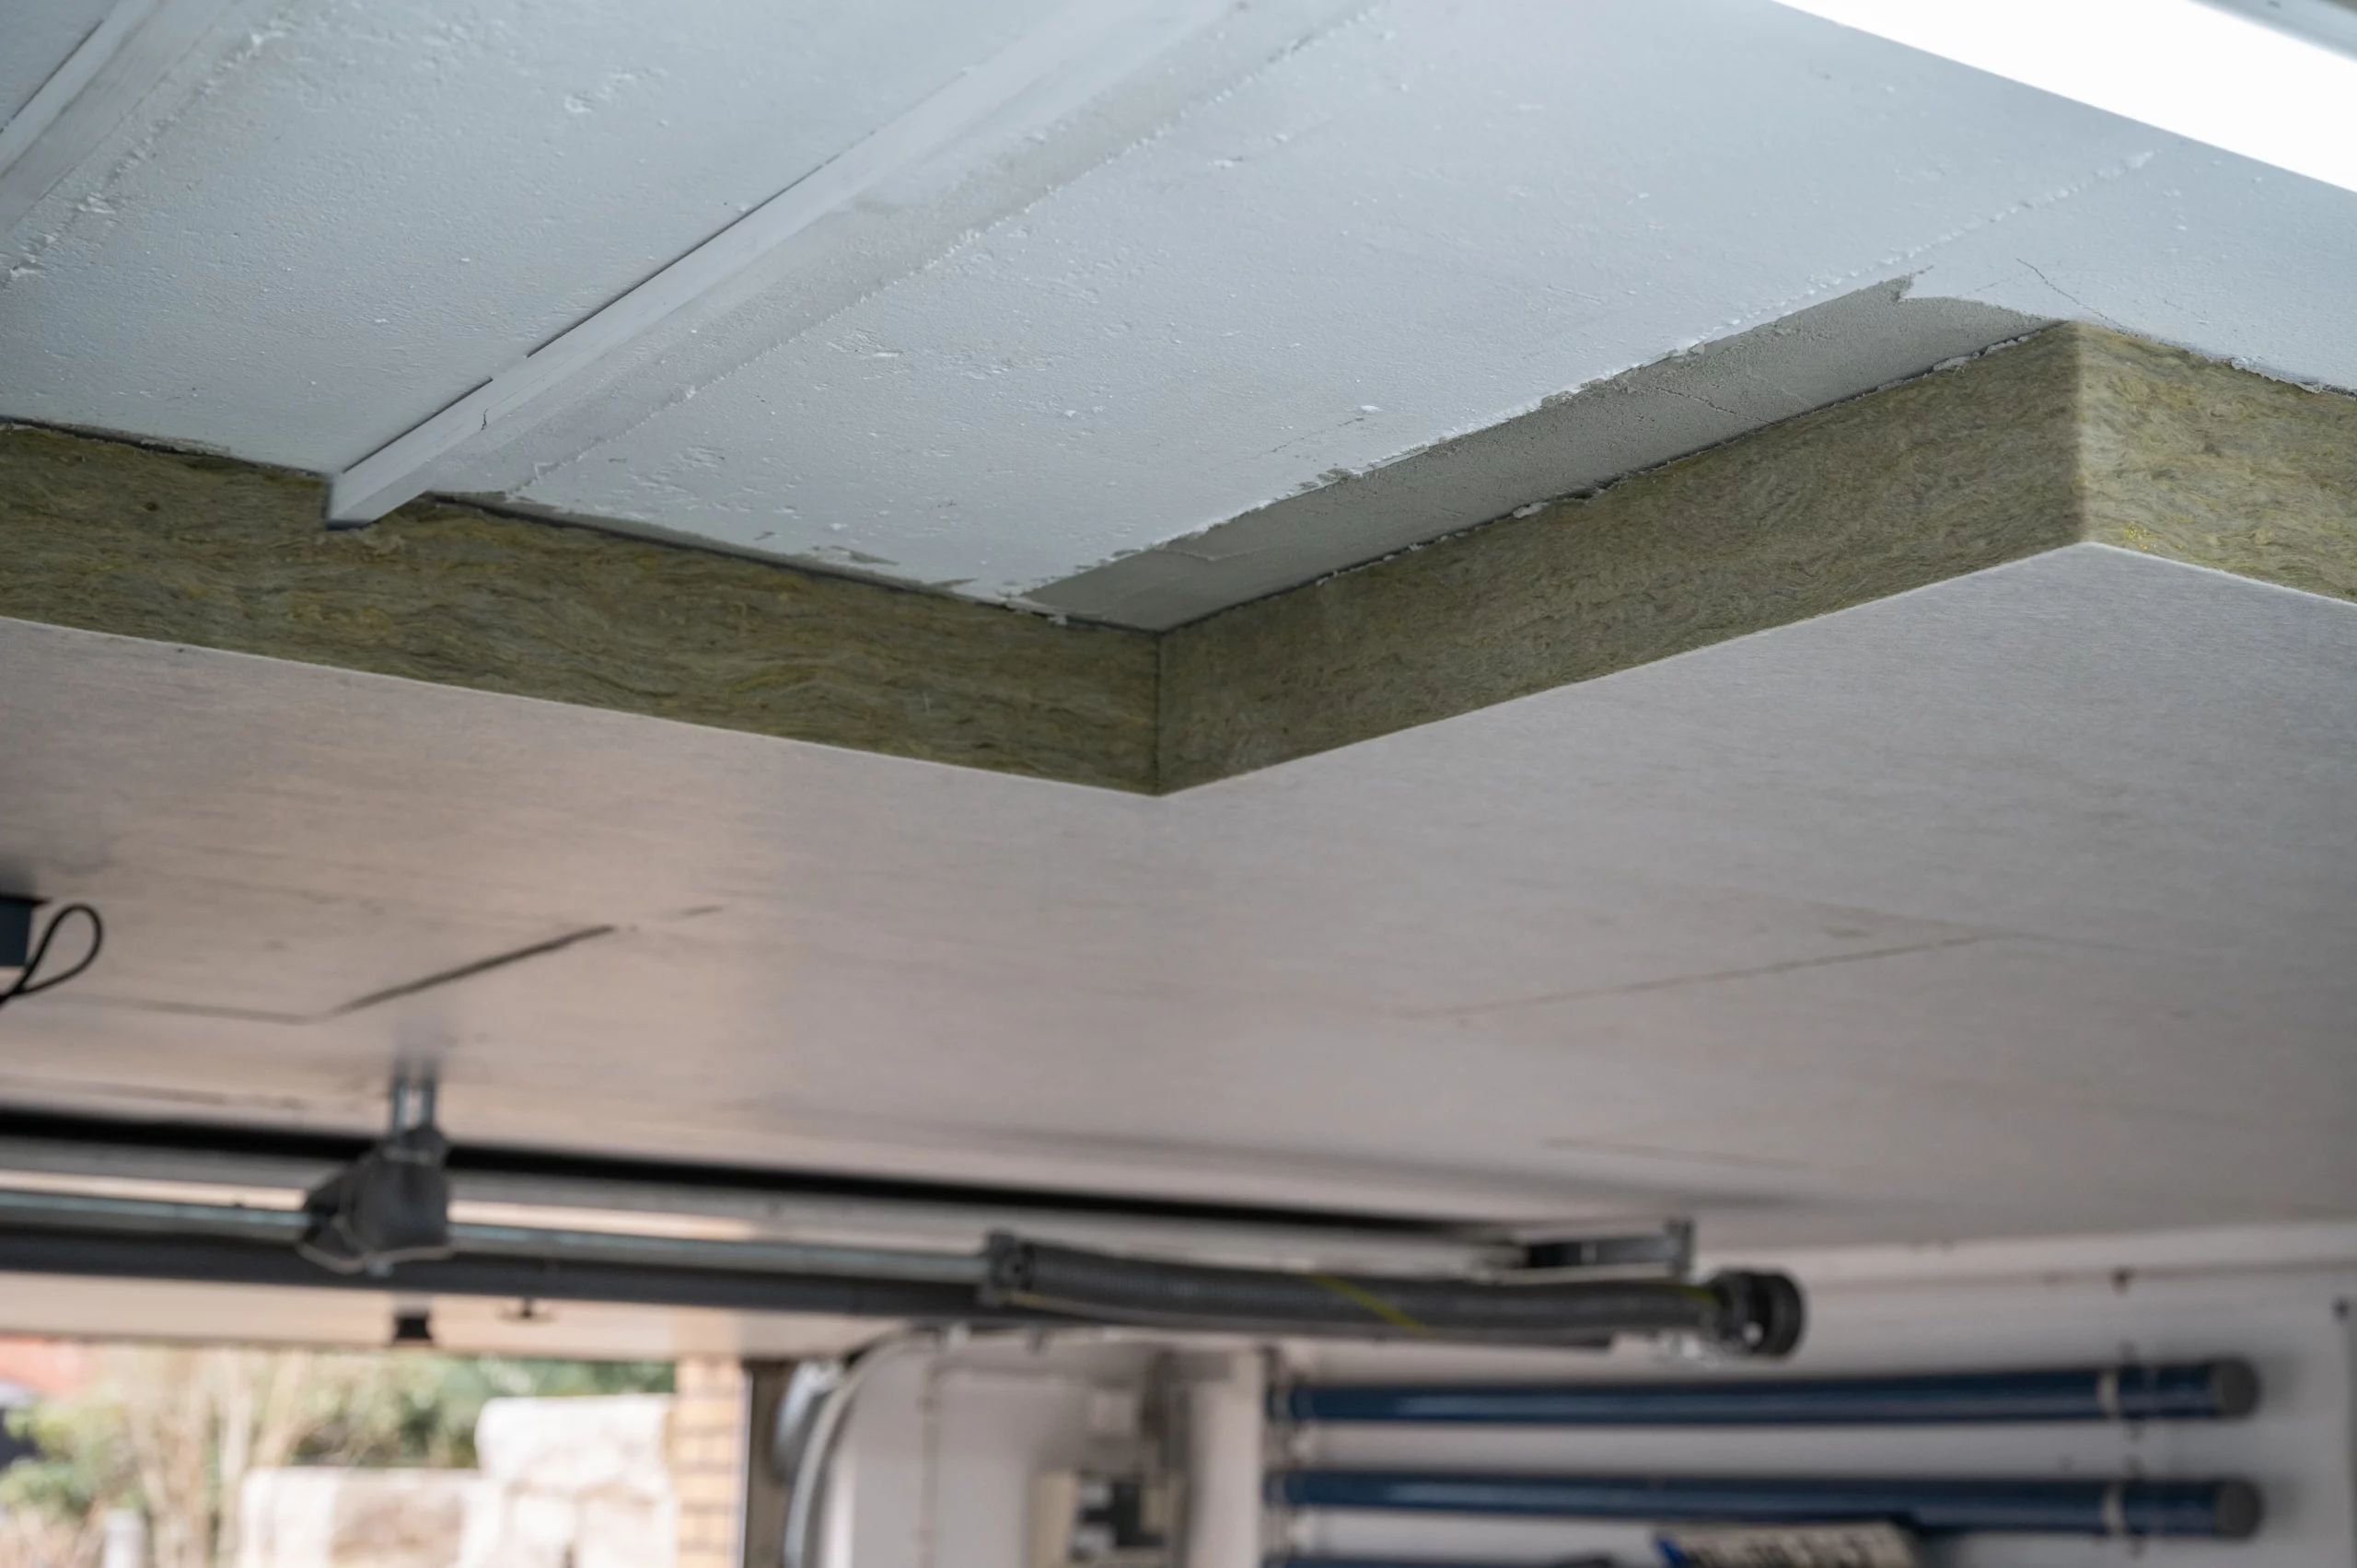 Garage Ceiling Insulation: Key Benefits and Installation Tips